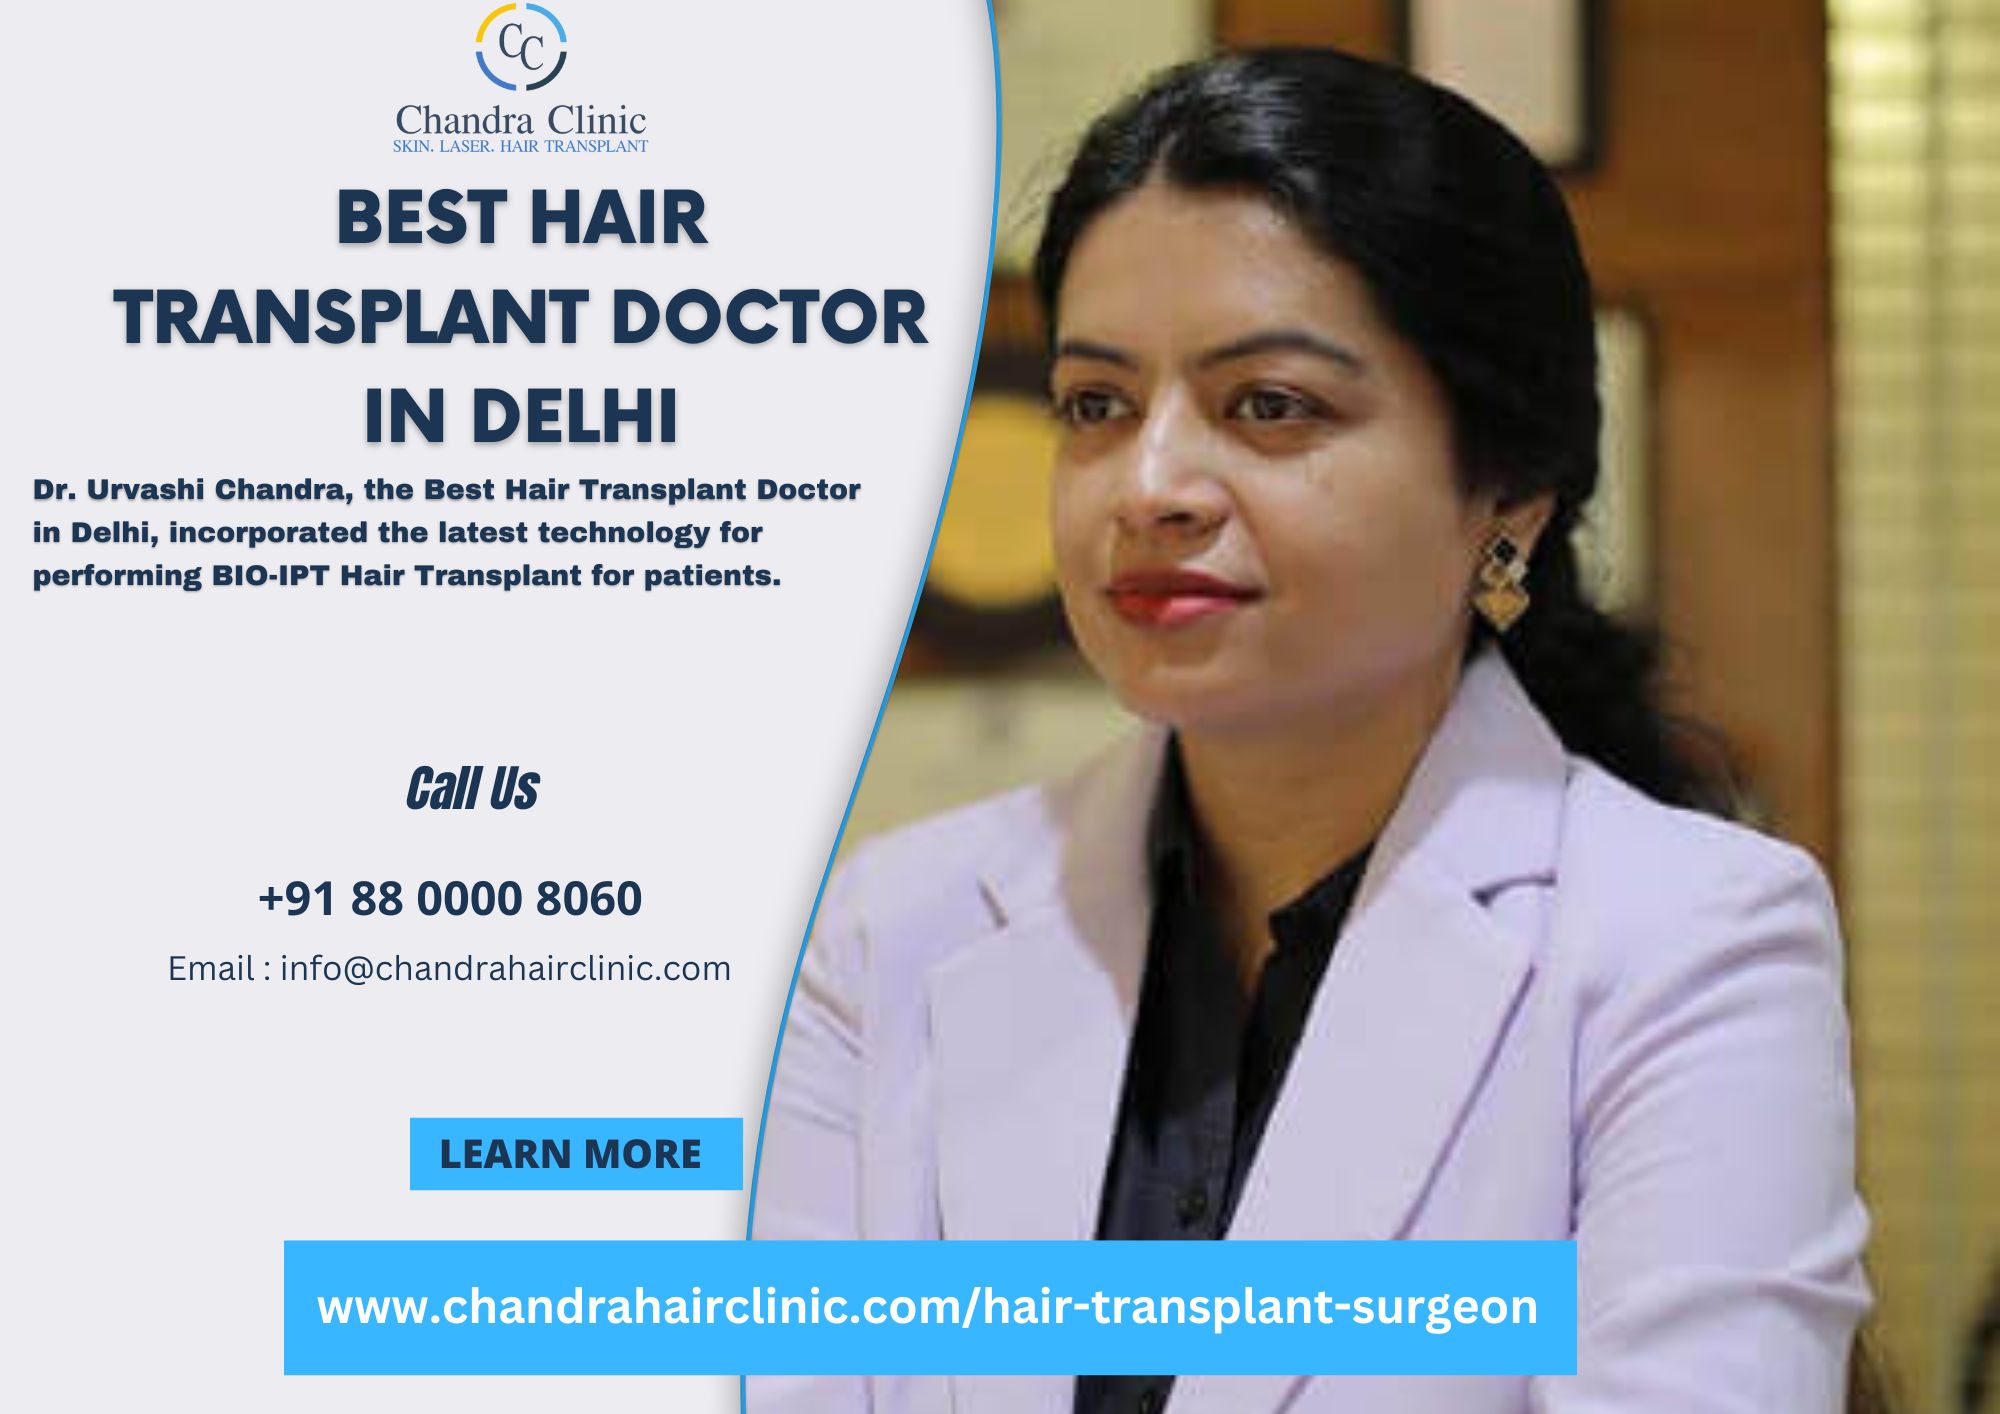 Best Hair Transplant Techniques Offered at Chandra Clinic-99fbd724